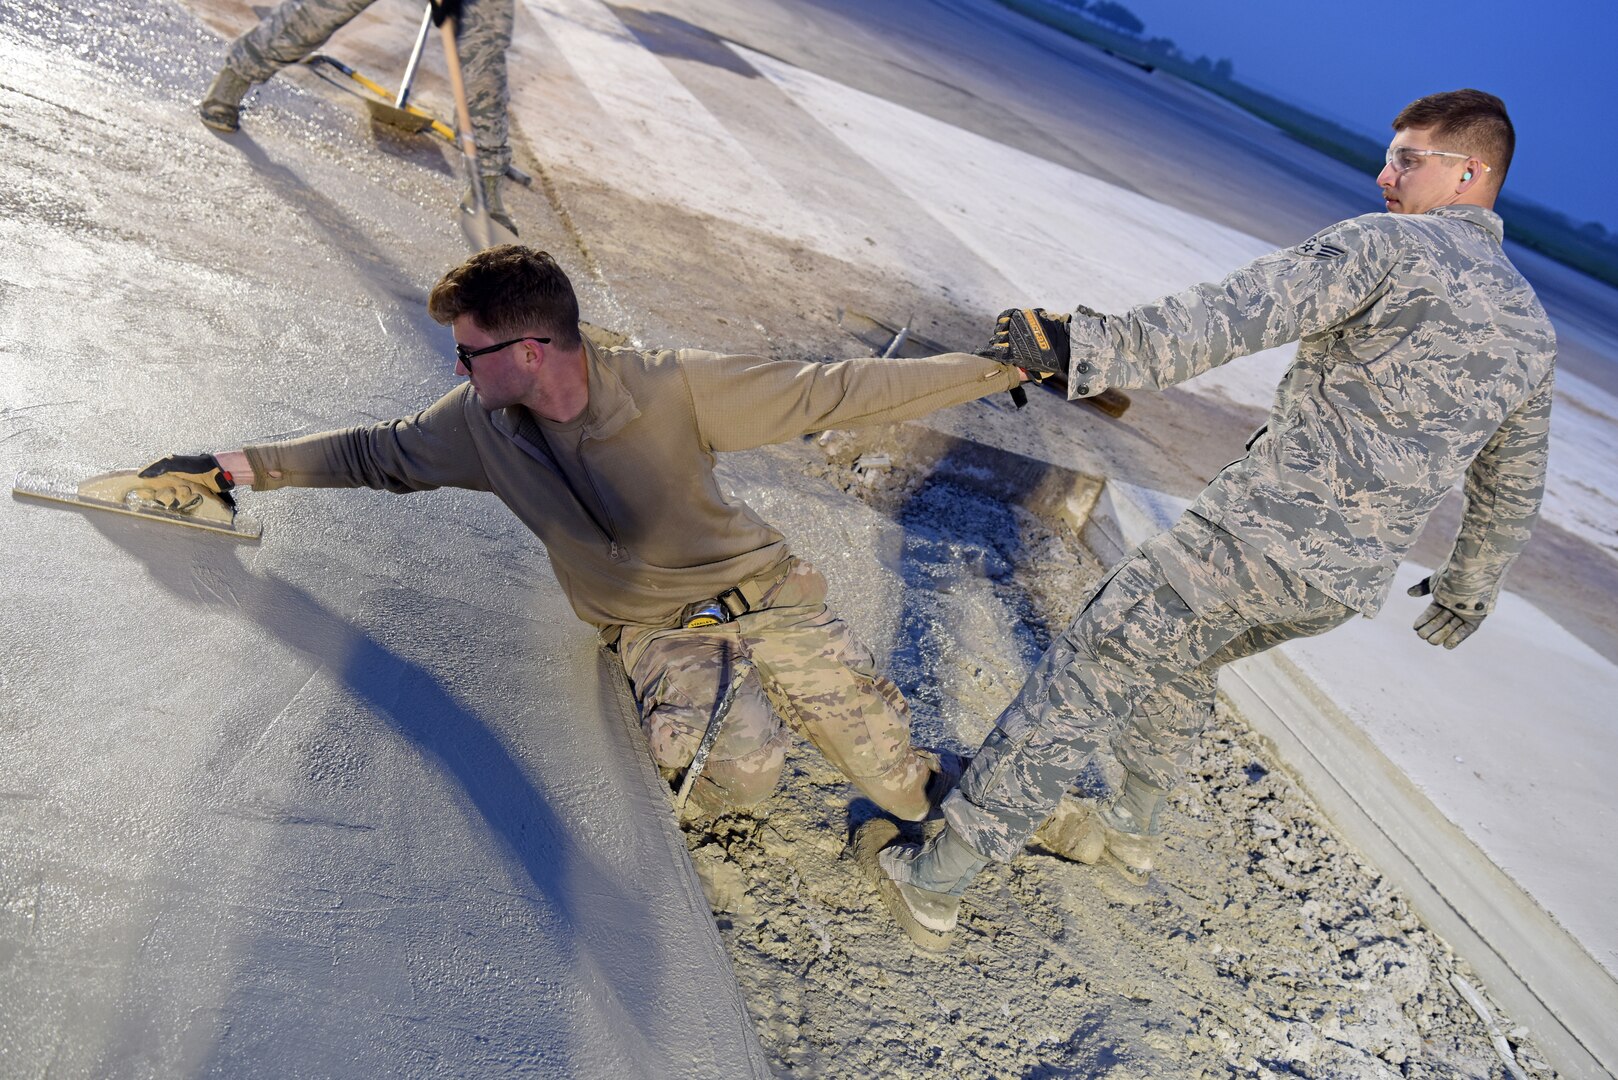 (Right) U.S. Air Force Senior Airman Steven Uhlbeck, 8th Civil Engineer Squadron pavement and construction equipment journeyman, assists Staff Sgt. Jeffrey Deptula, 8th CES, with smoothing wet concrete on the flight line at Kunsan Air Base, Republic of Korea, May 2, 2019. The 8th CES applied rapid airfield damage repair methods to fix a rupture that caused damage to the flight line. (U.S. Air Force photo by Staff Sgt. Joshua Edwards)